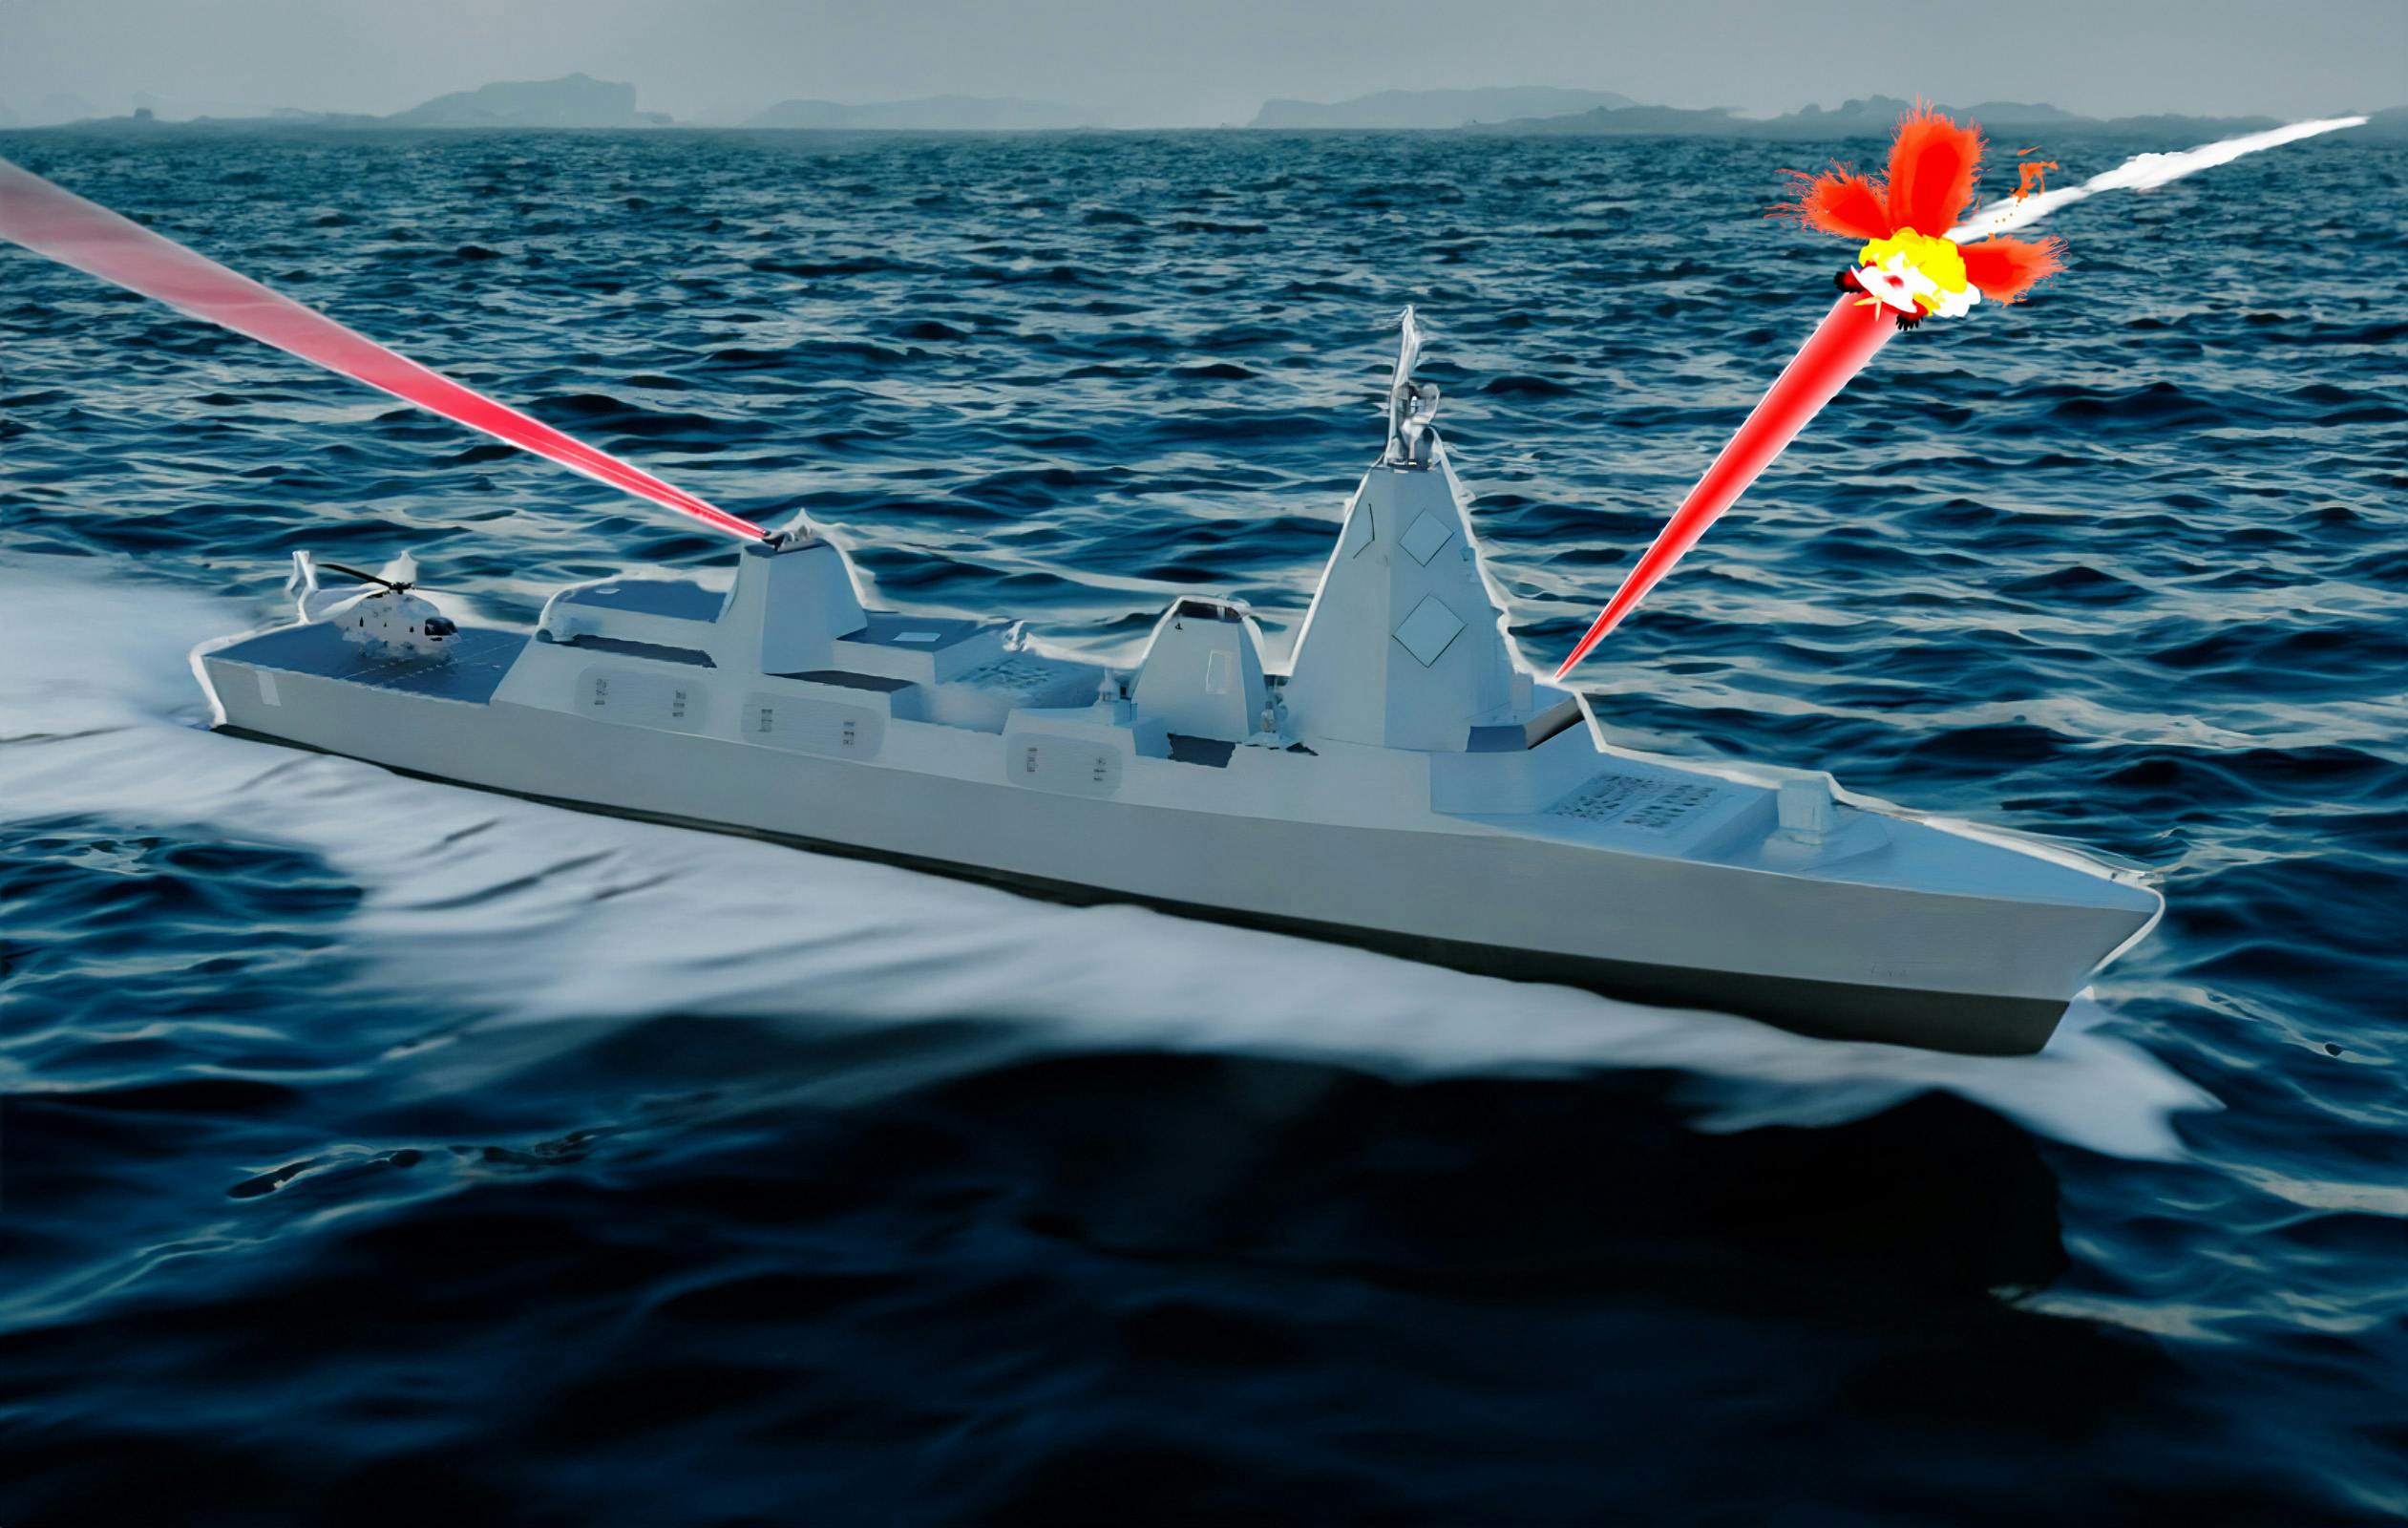 Britain’s new Type 83 Destroyer to be armed with laser guns